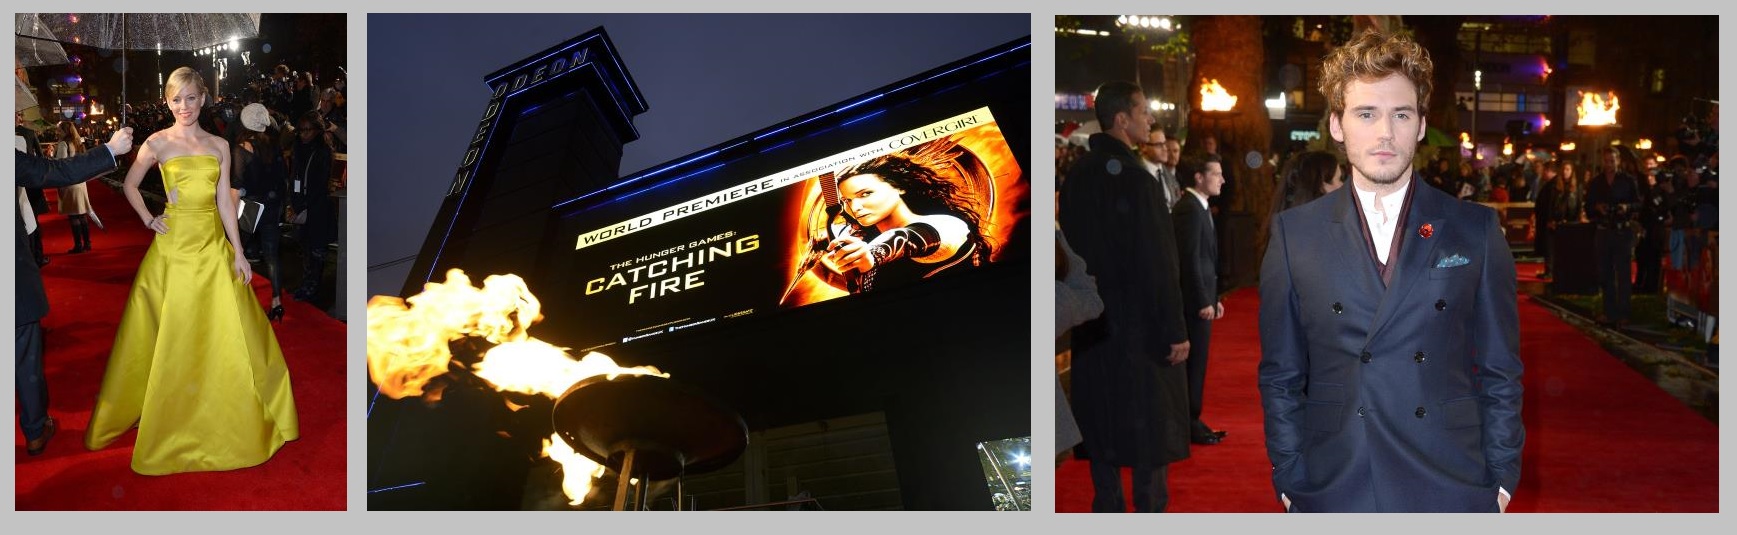 Flame effects Catching Fire Premiere